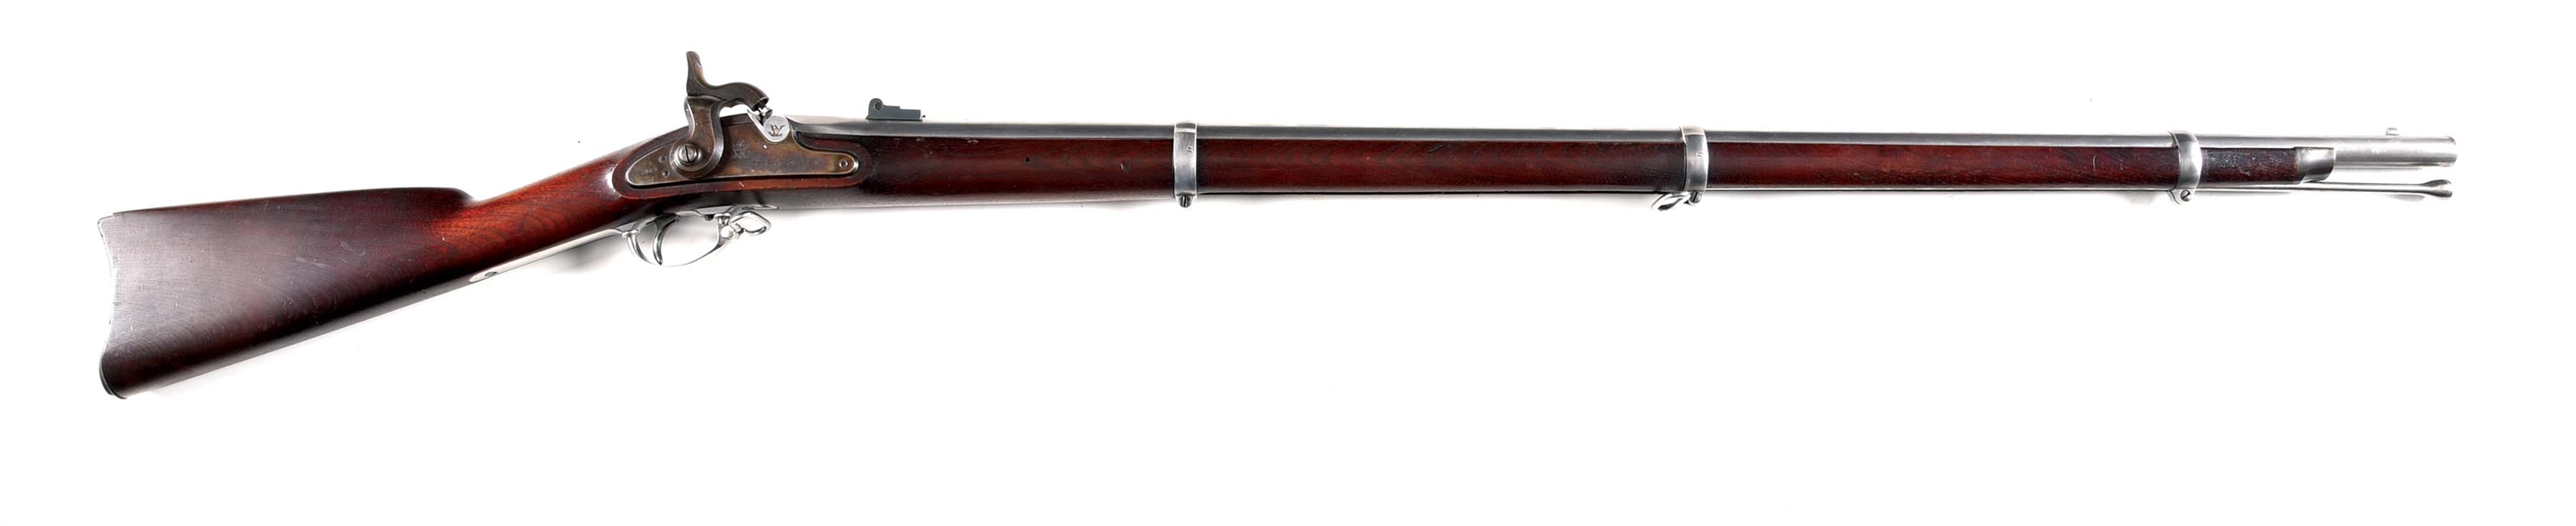 (A) FINE US SPRINGFIELD MODEL 1863 TYPE I PERCUSSION RIFLED MUSKET.